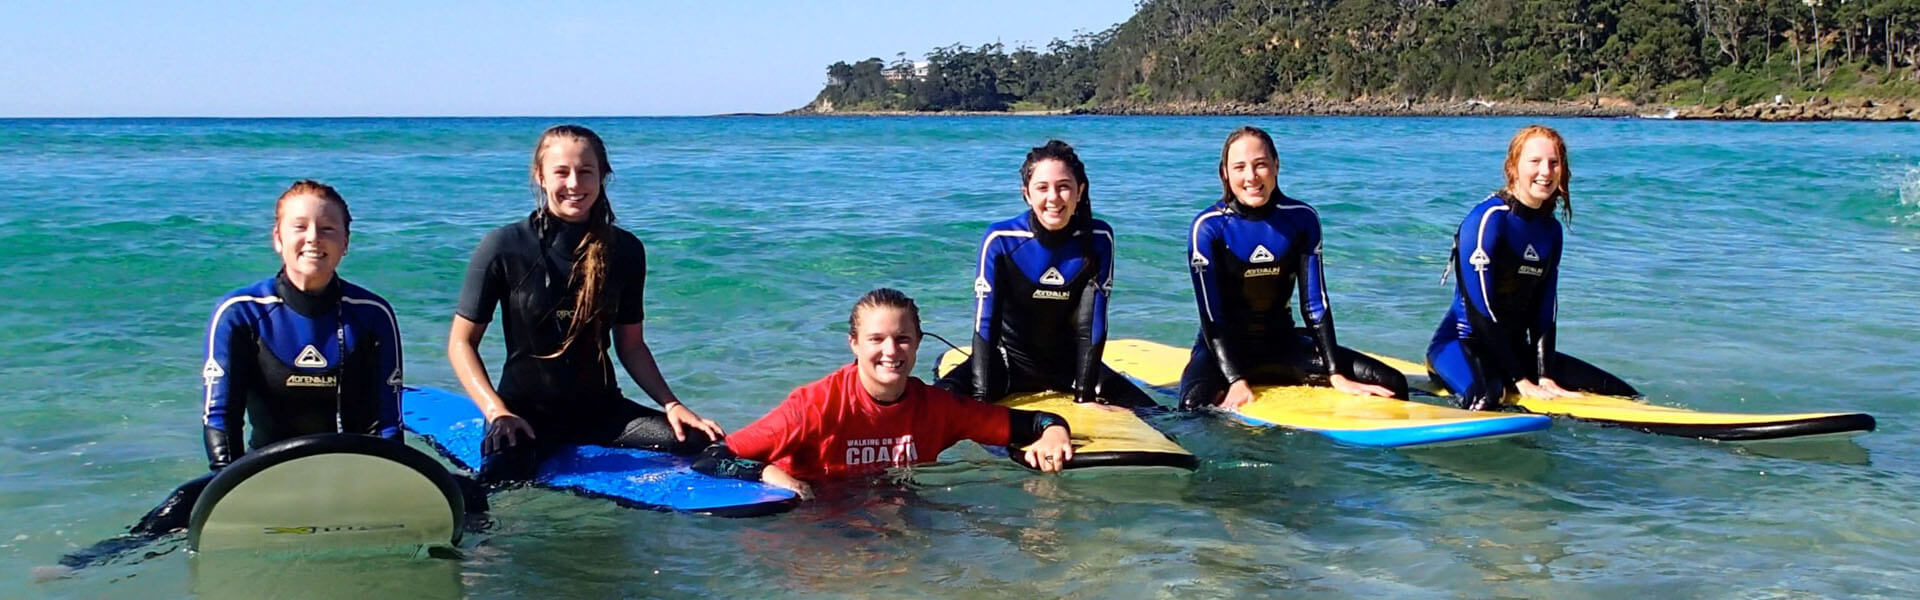 Surfing lessons girls in wetsuits sitting on surfboards in a row with instructor in the water in the middle